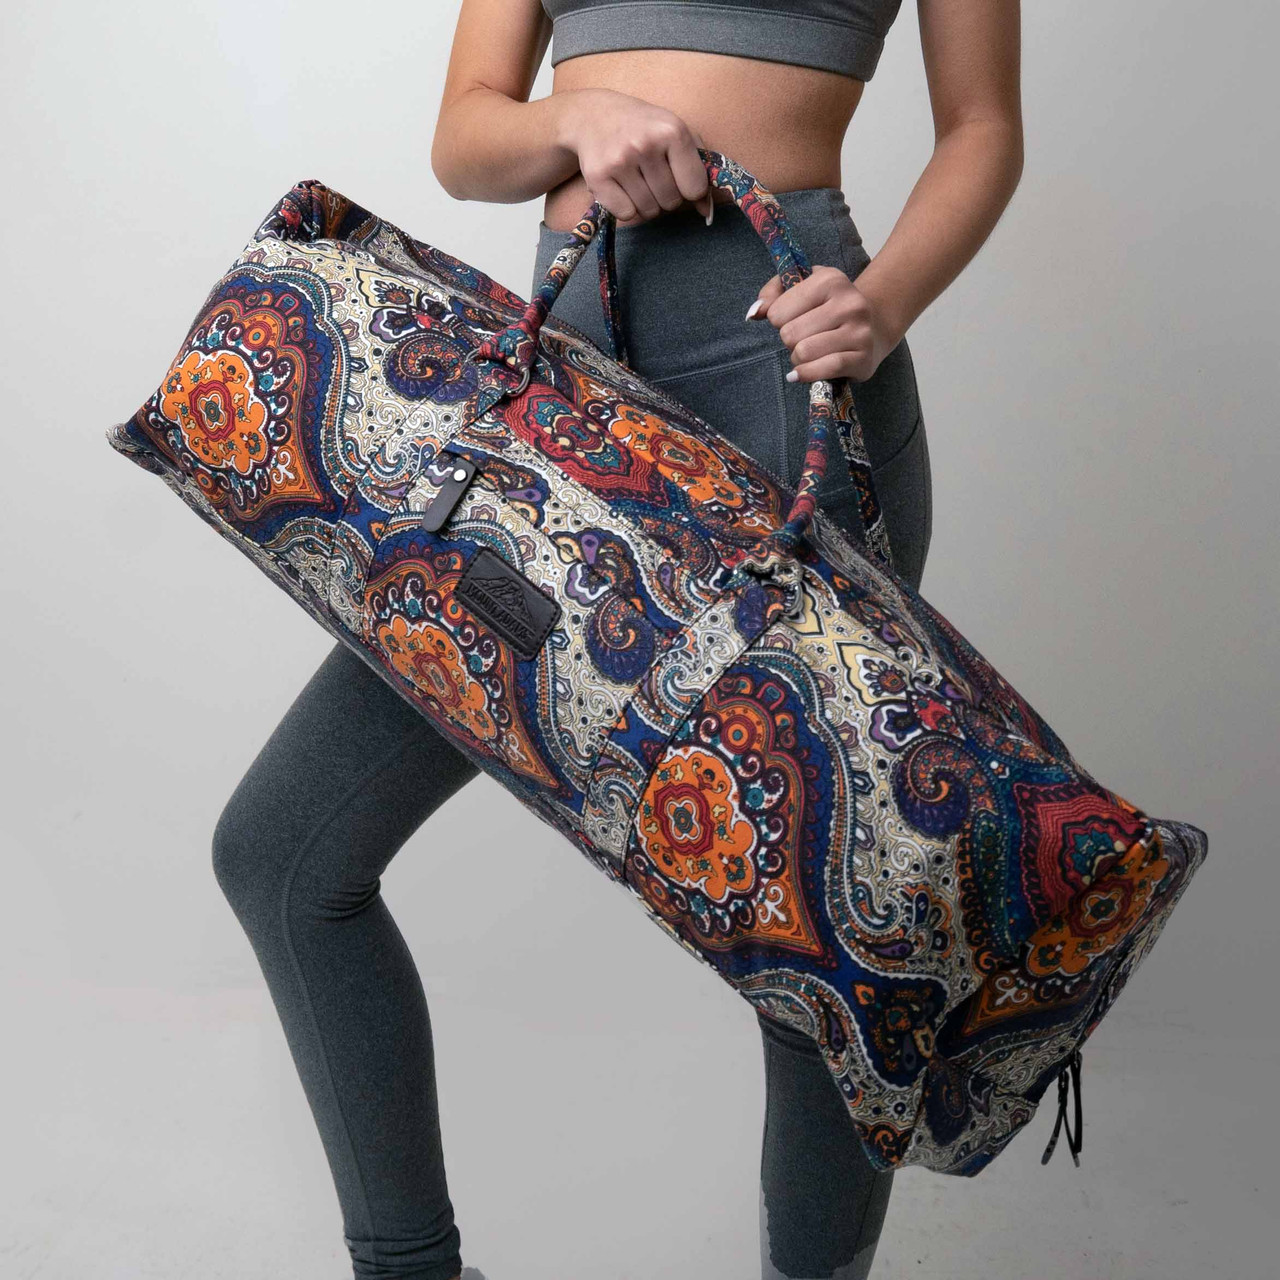 ATHLECIA Orchily Bag - Yoga bag Women's, Buy online